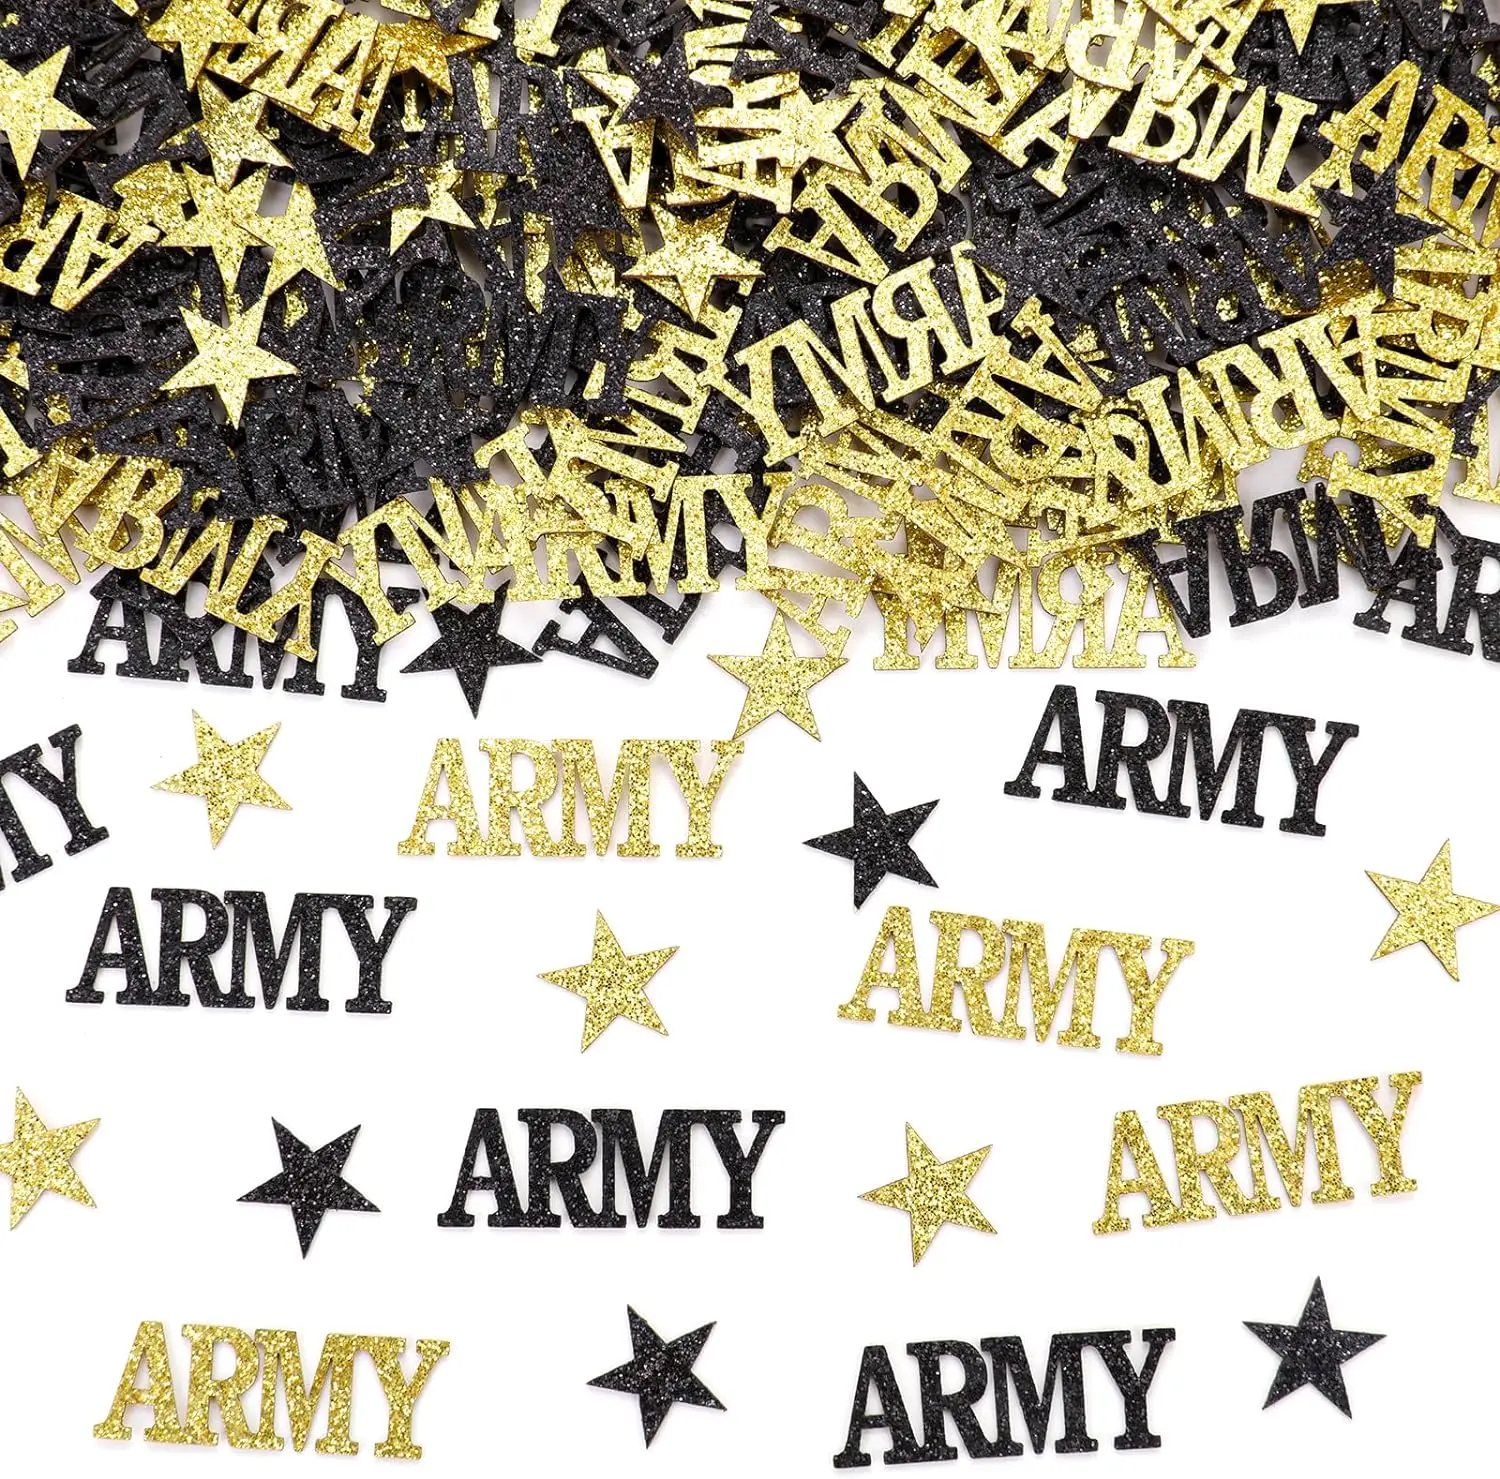 

200pcs US Army Confetti Glitter Military Themed Party Decor Double-Sided Confetti for Welcome Ceremony Army Party Adult Camping